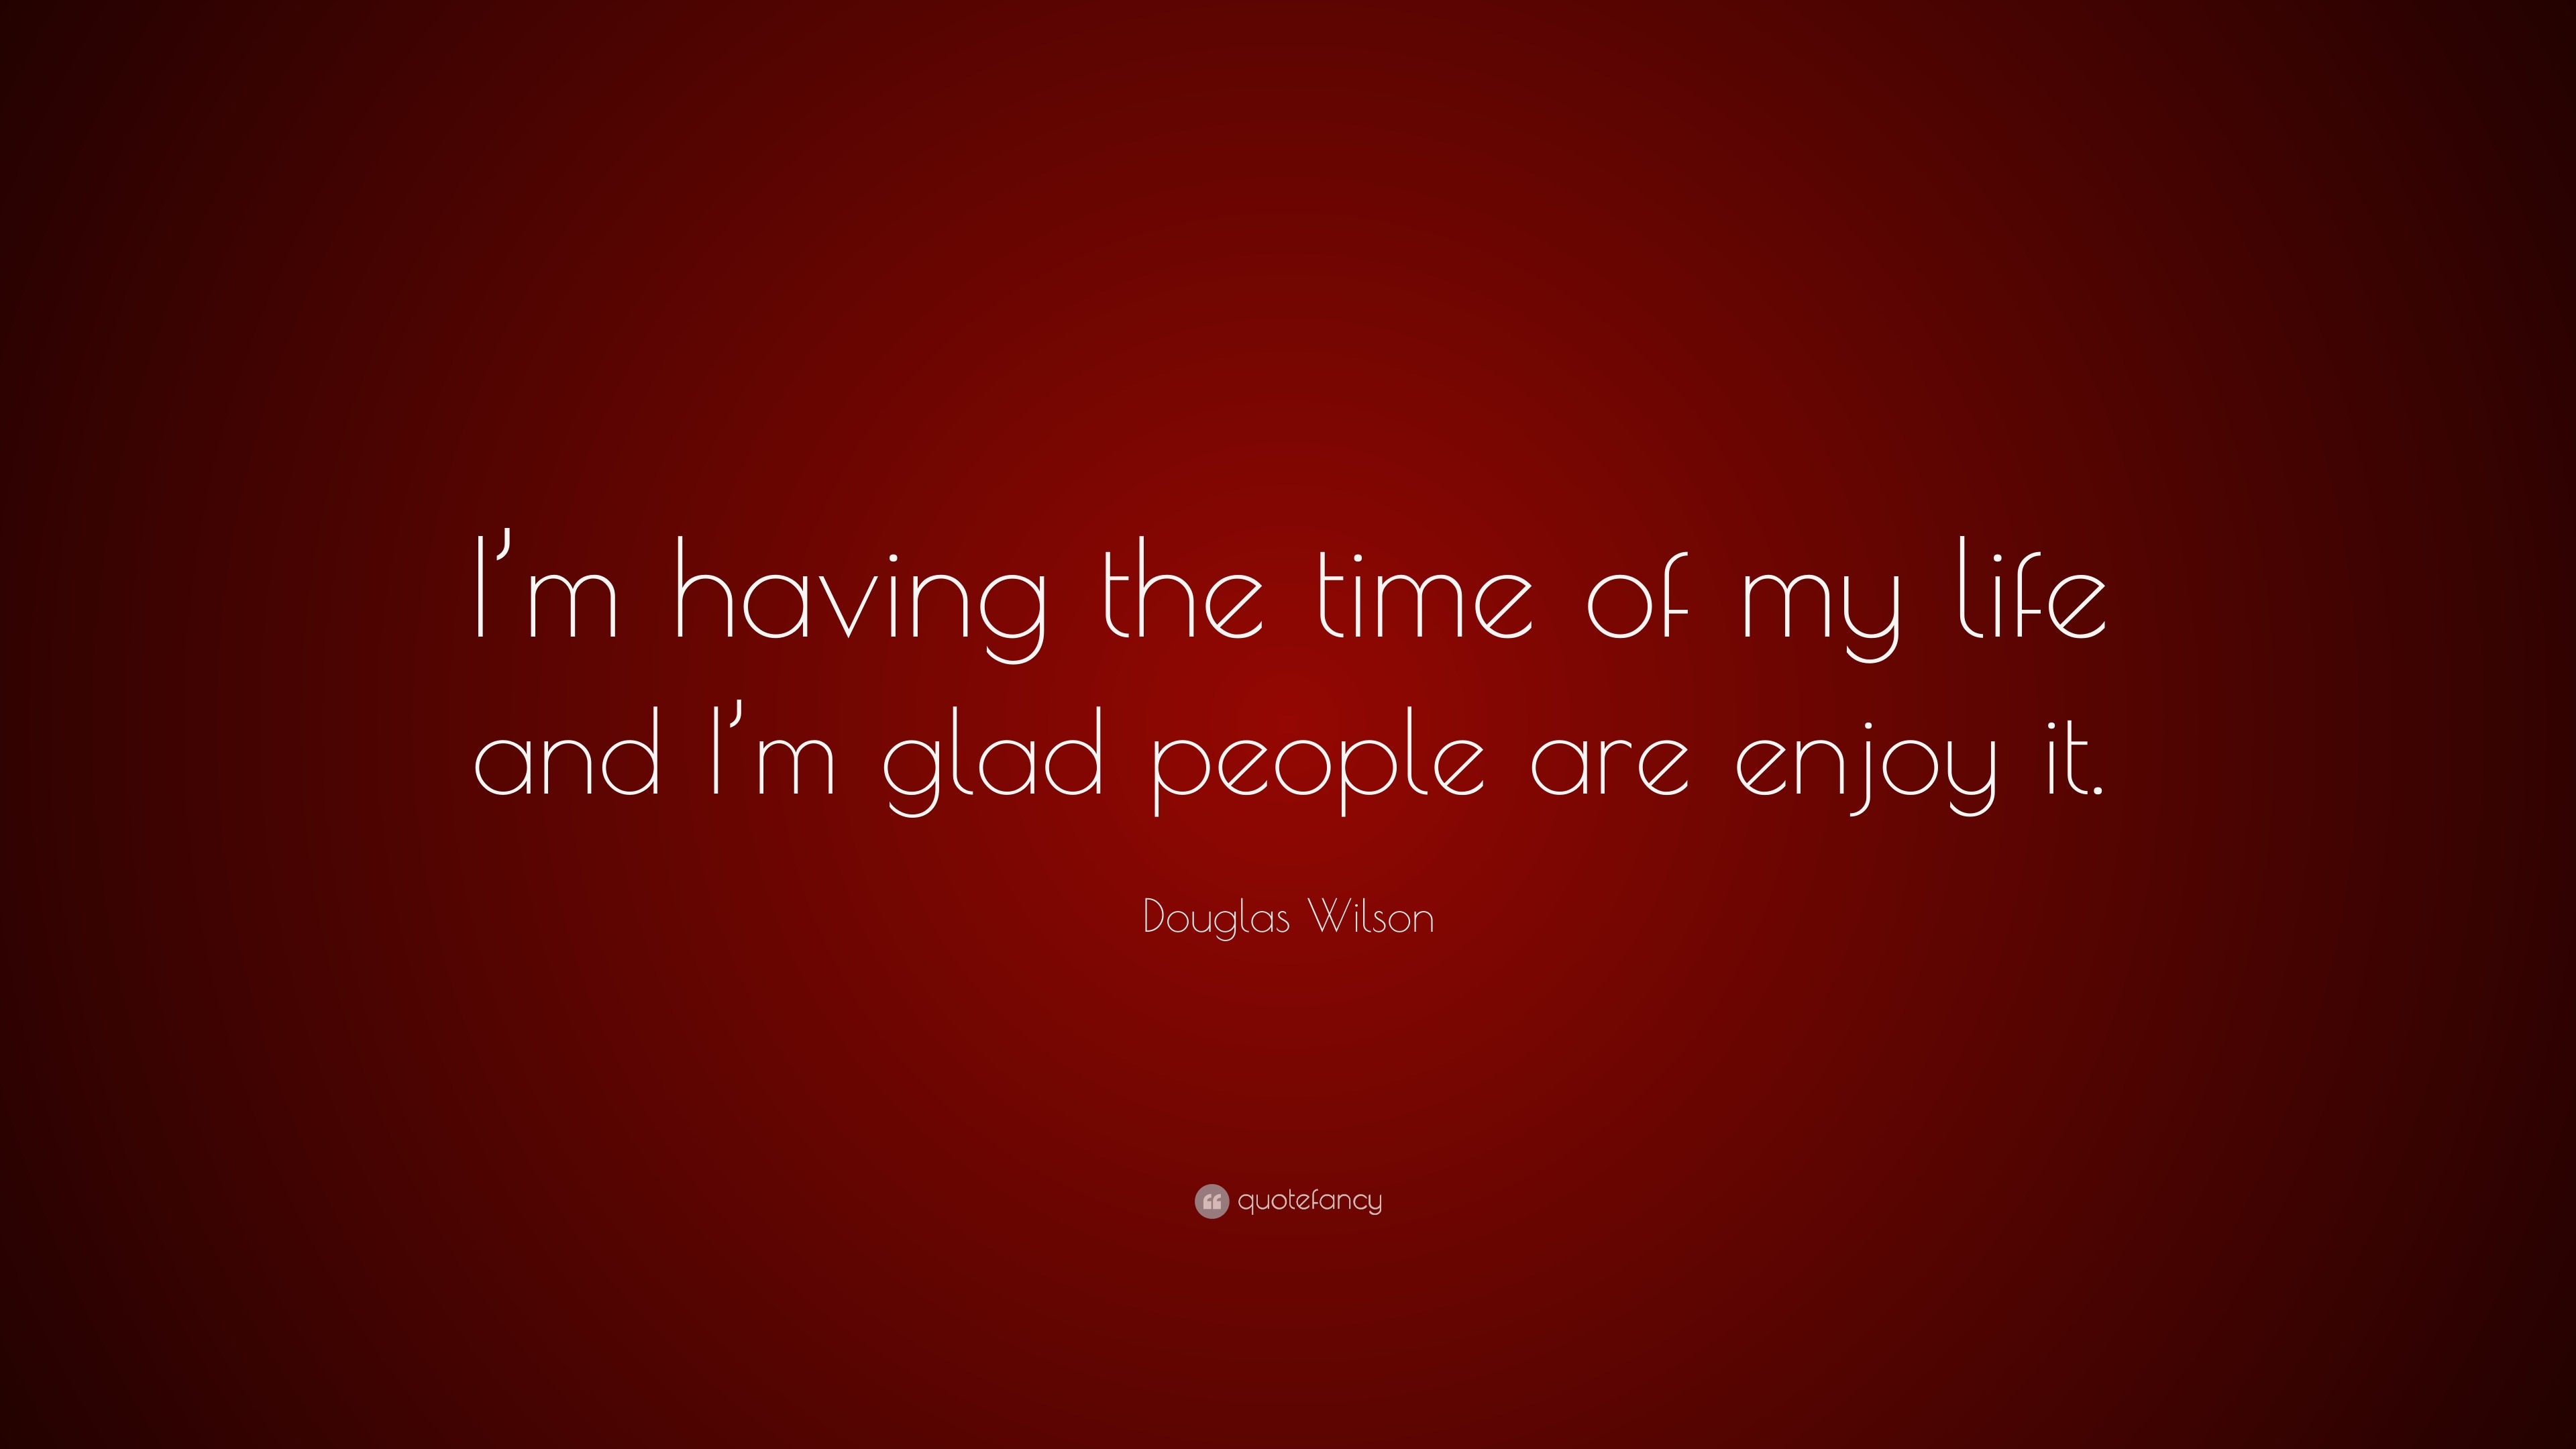 Douglas Wilson Quote “I m having the time of my life and I